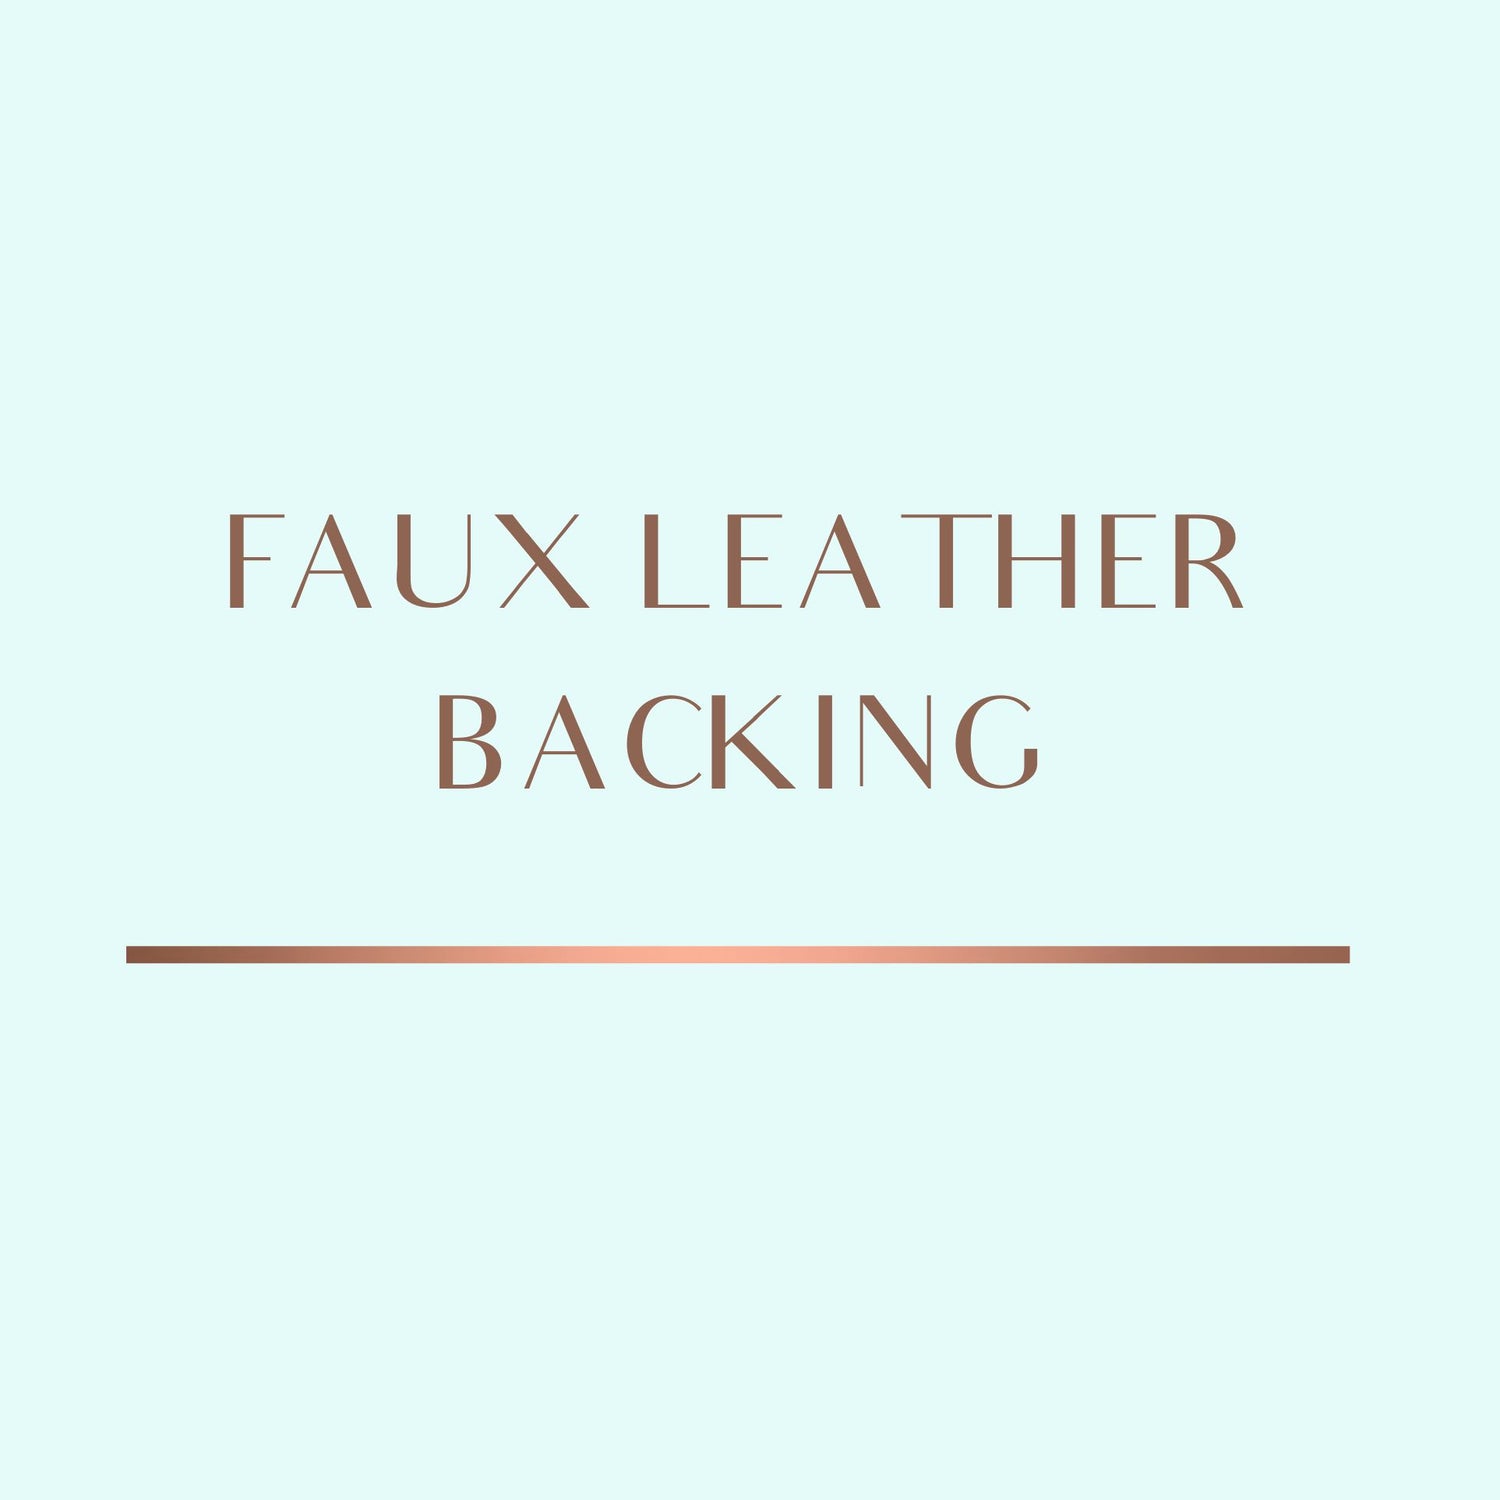 FAUX LEATHER BACKING